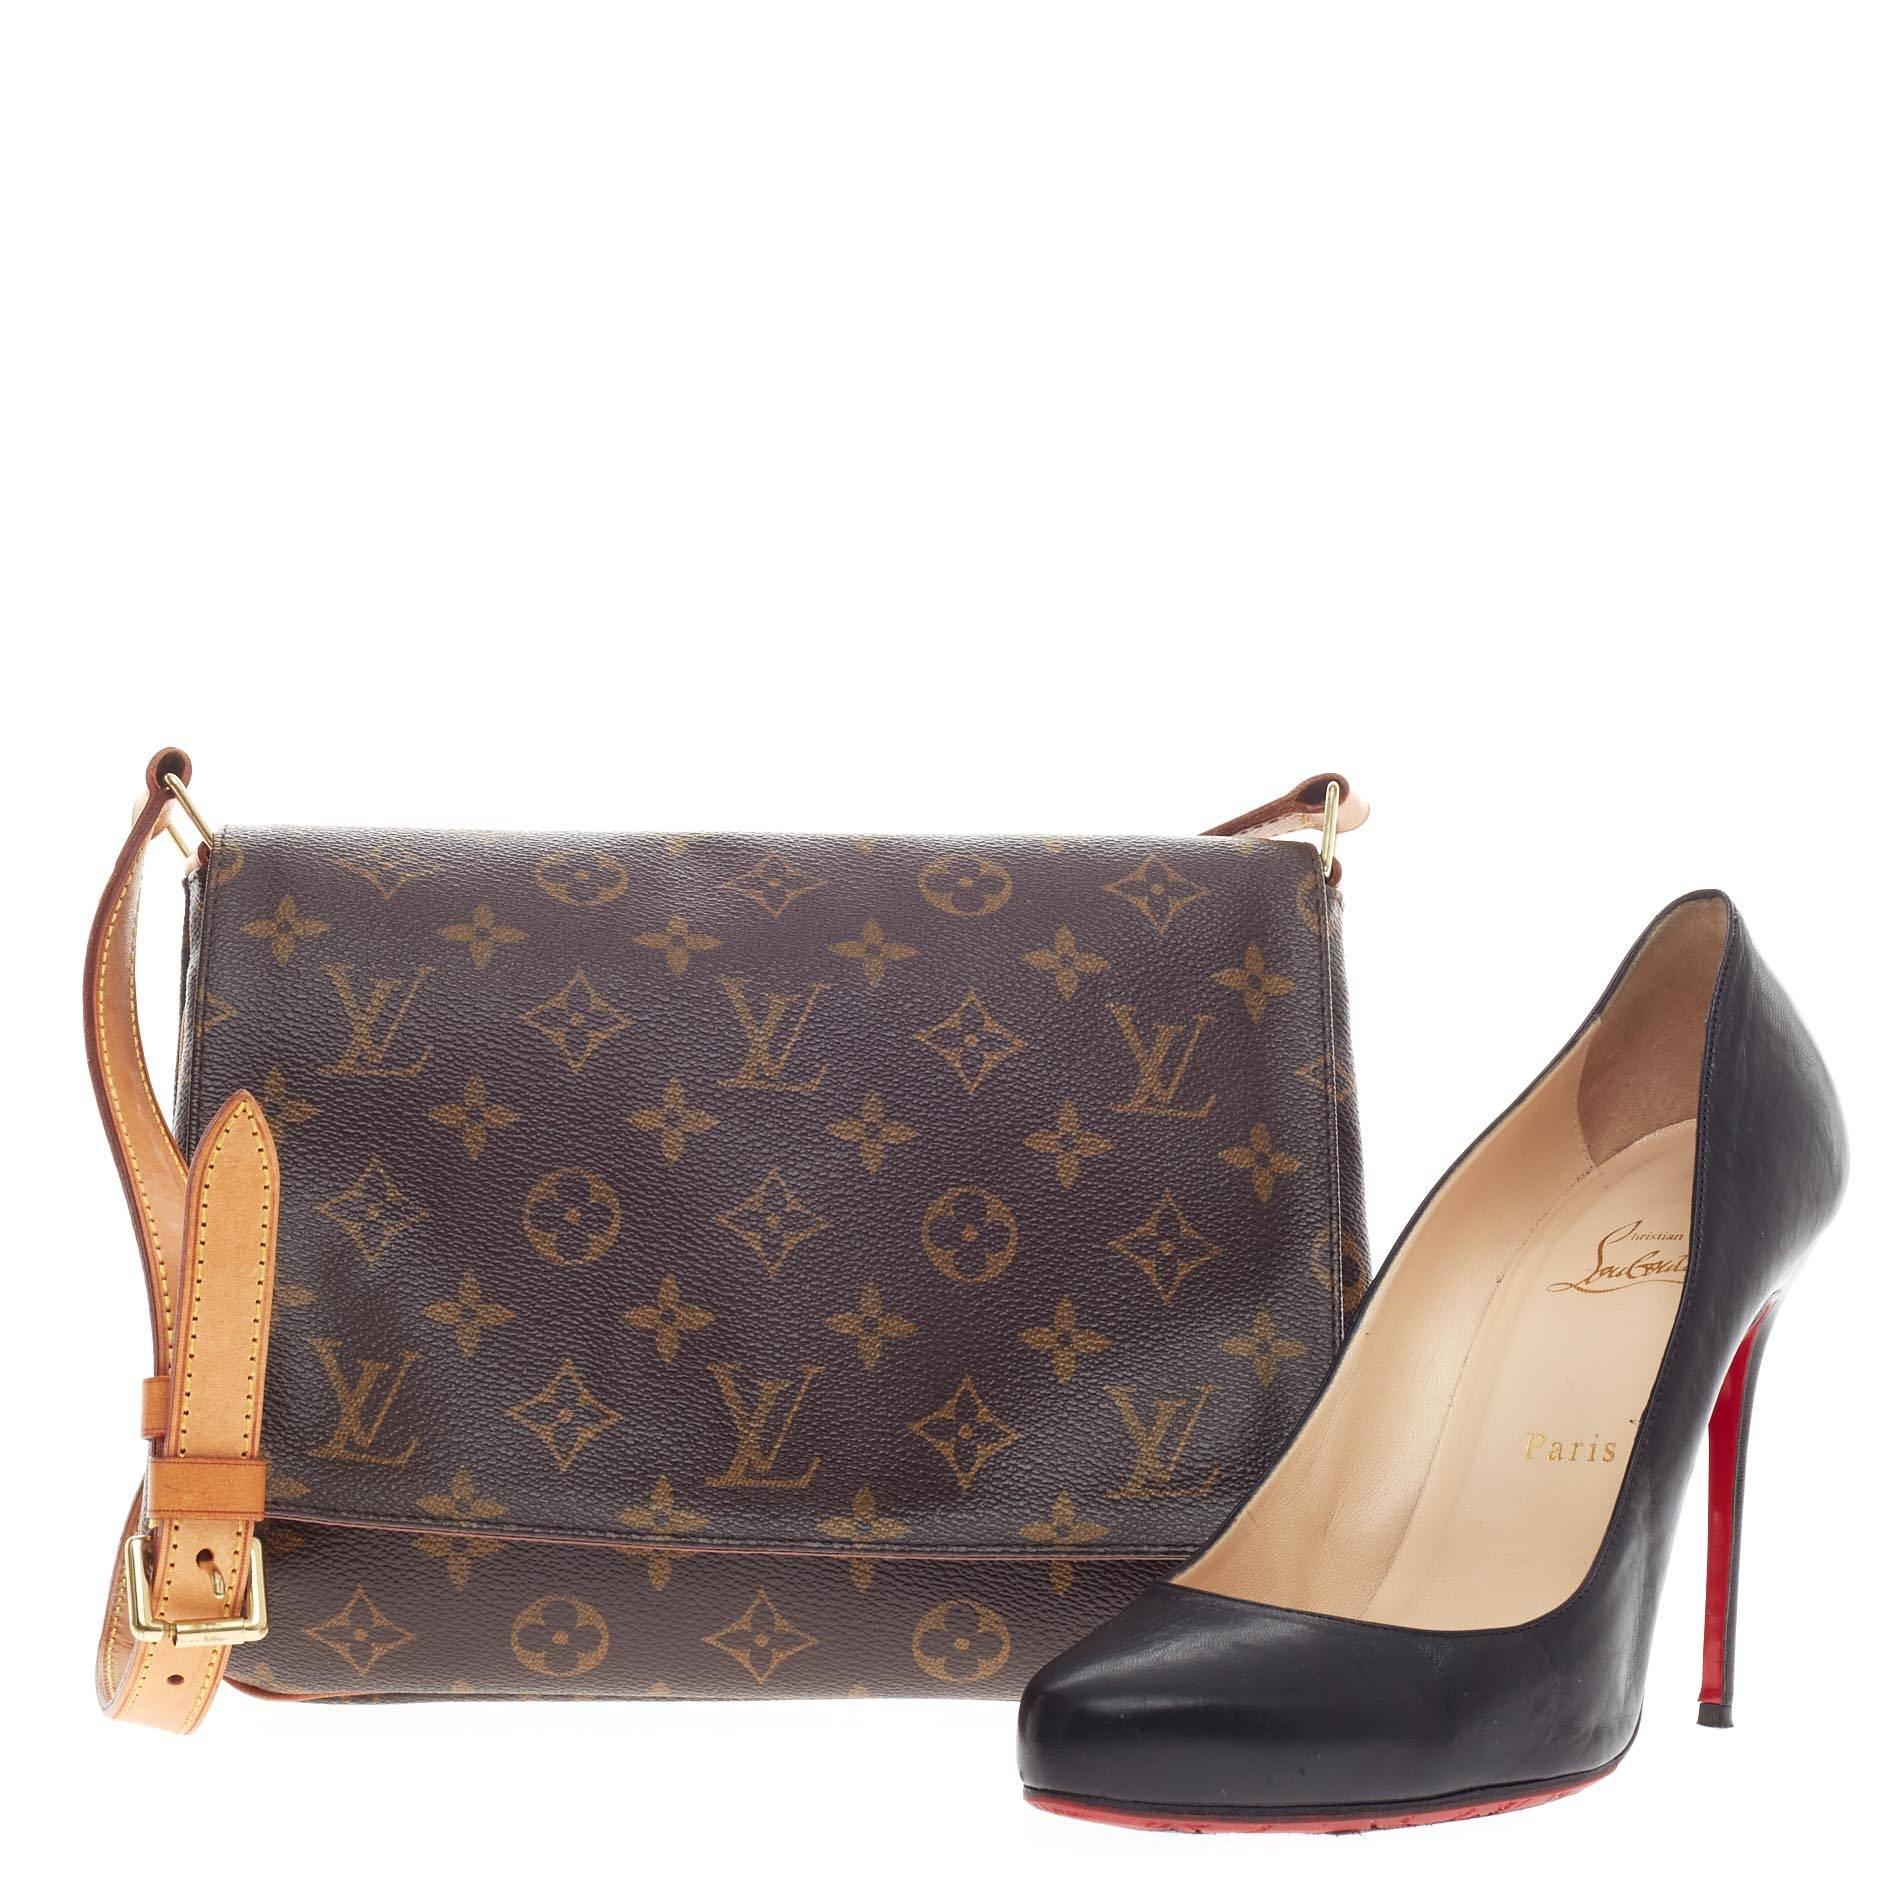 This authentic Louis Vuitton Musette Tango Monogram Canvas features the classic Louis Vuitton brown monogram canvas print on a simple, classic satchel design. This bag features a full flap style, adjustable cowhide leather strap for added